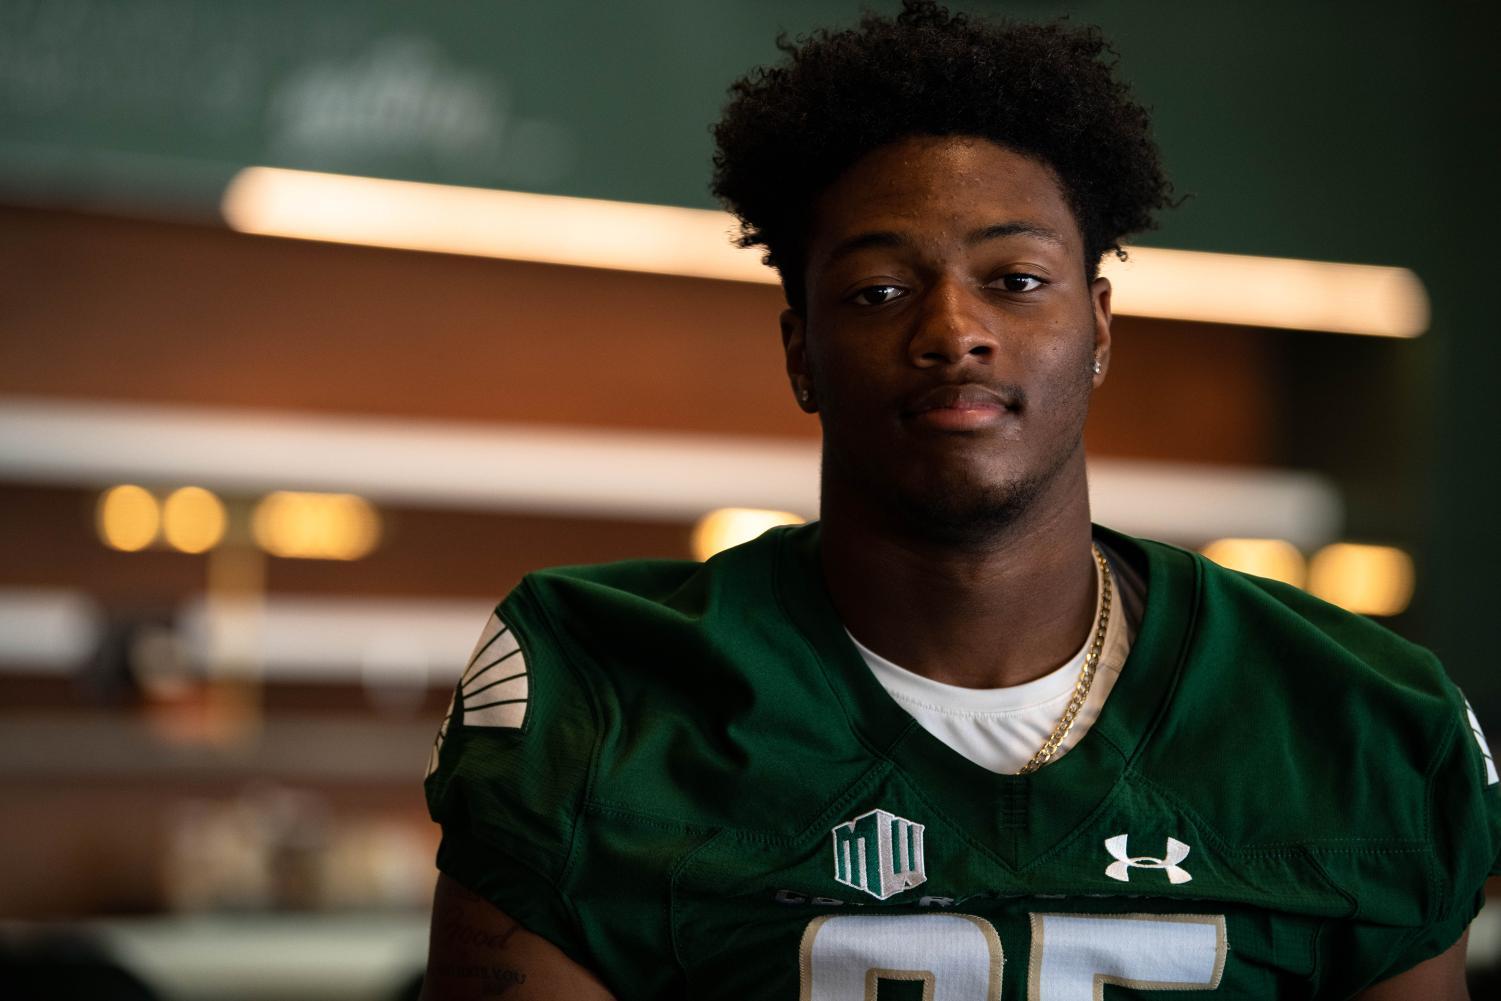 From high school to college, Colorado State's Louis Brown, Justus